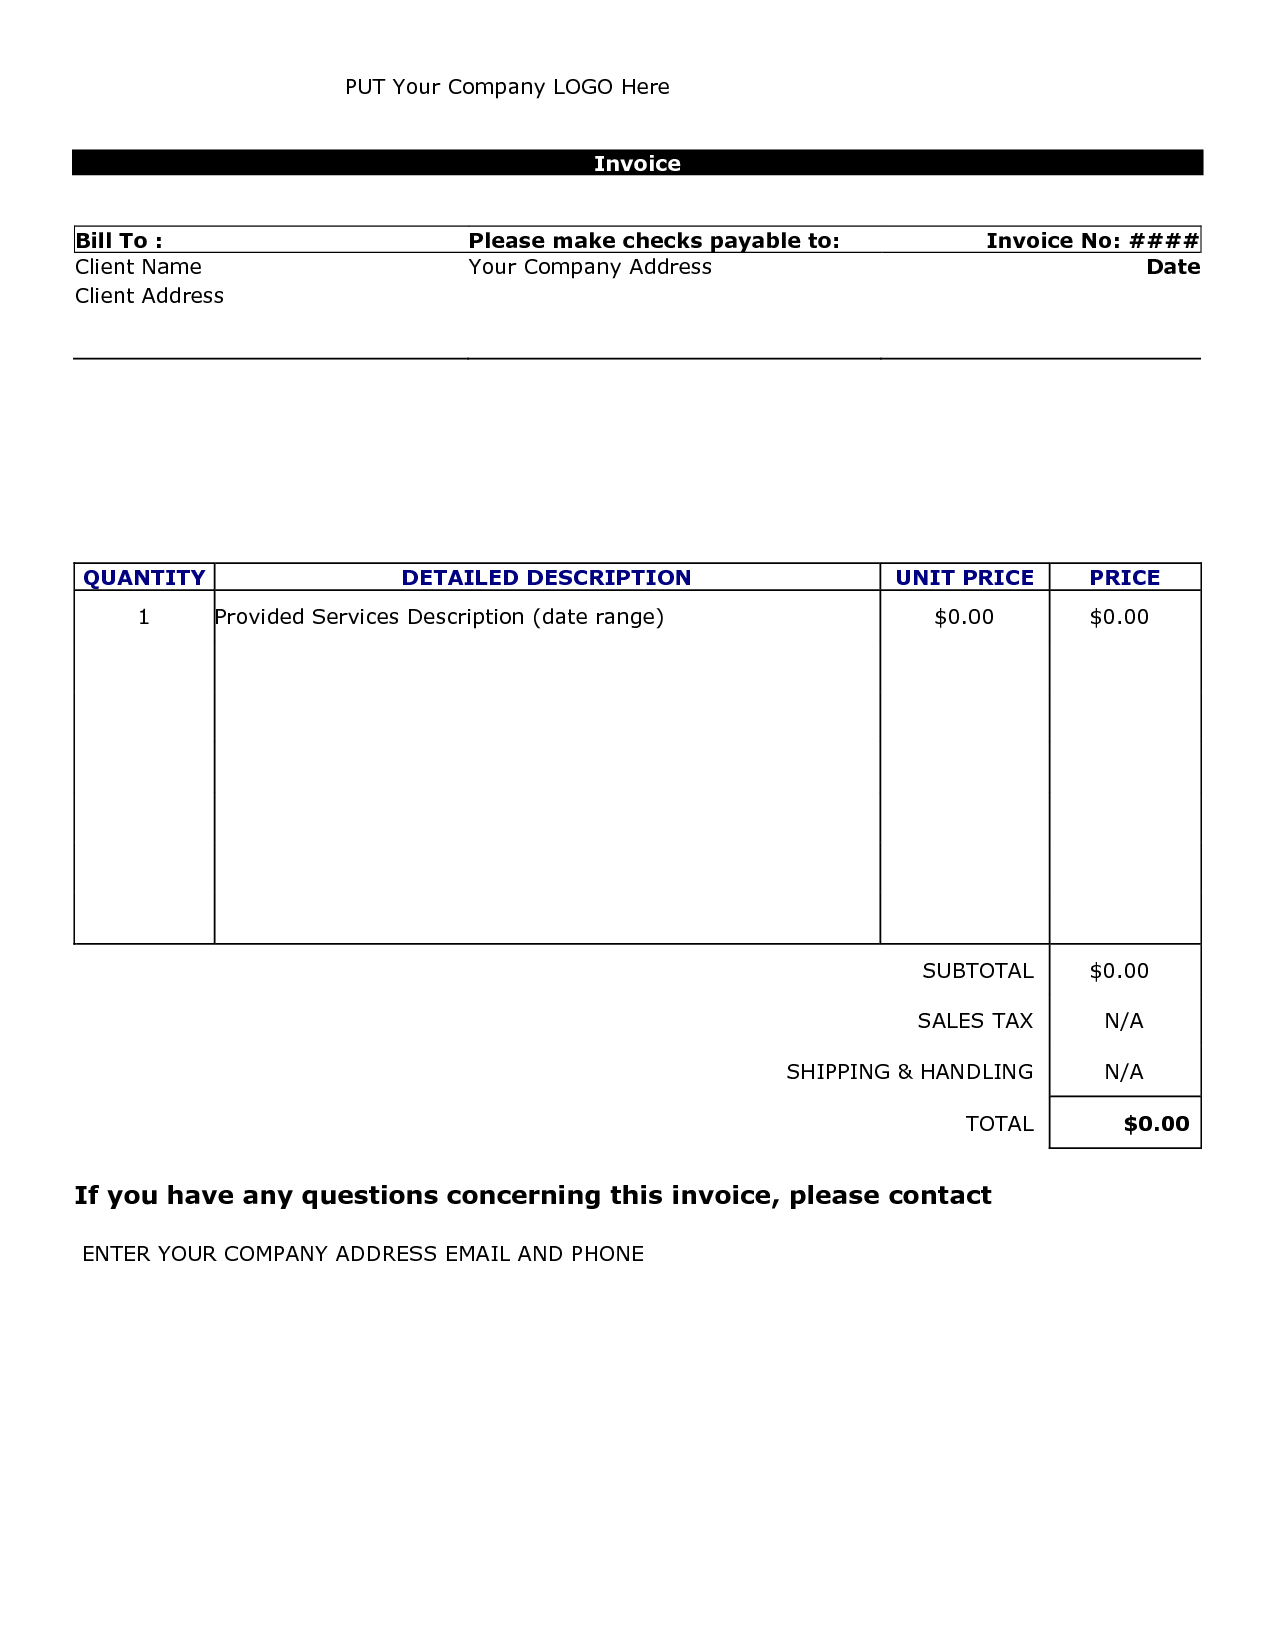 Doc.#513666: Invoice Layout Example – Free Invoice Template for 